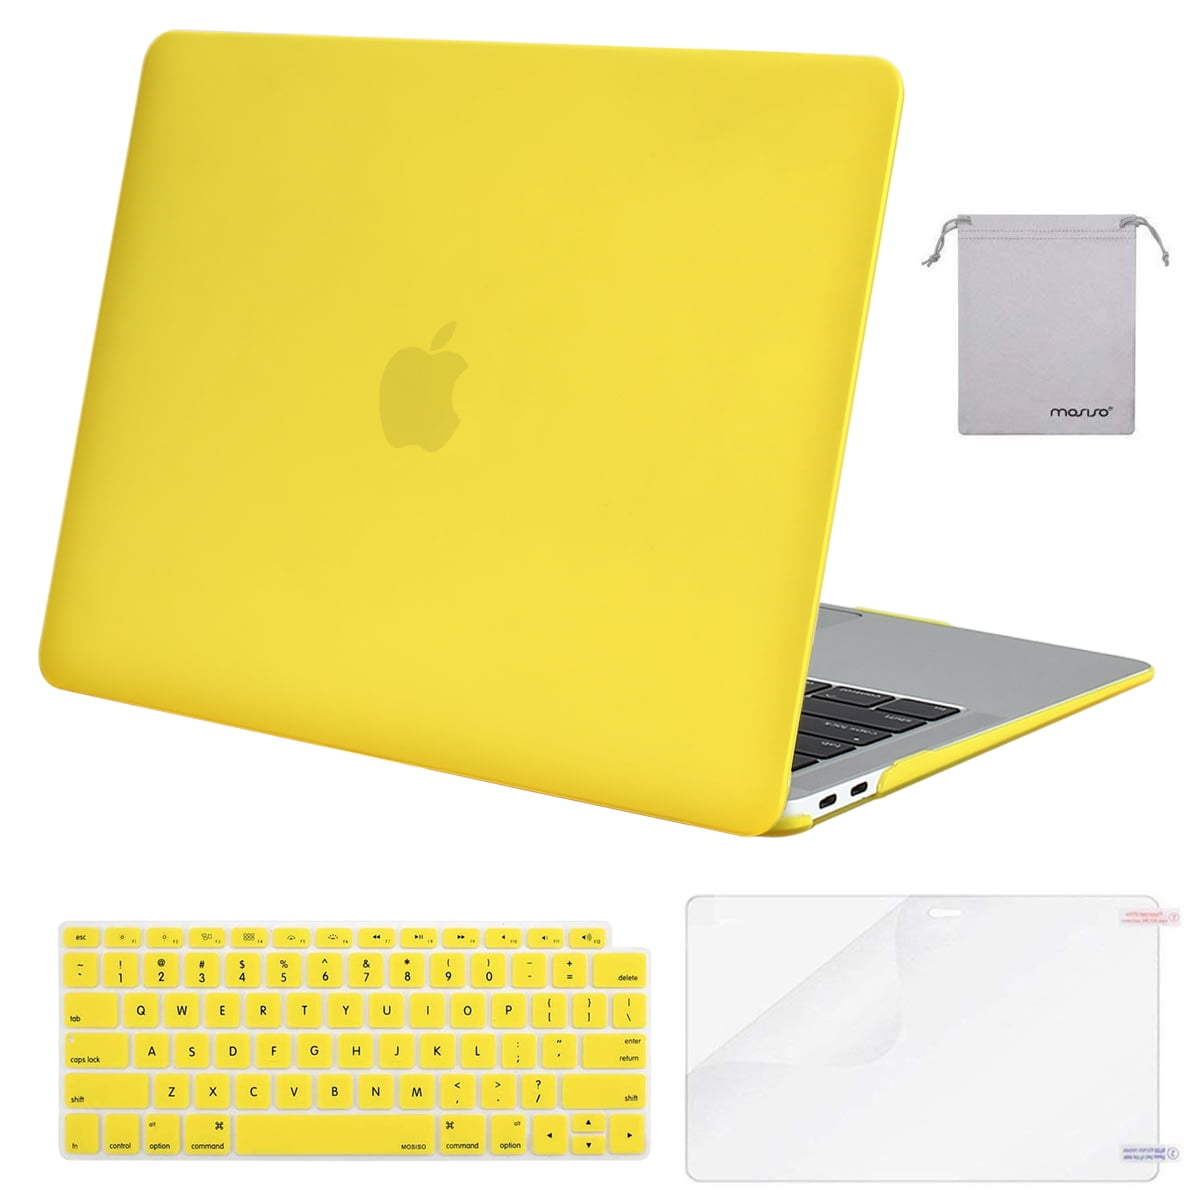 2X Keyboard Cover for MacBook Pro/Air/Retina 11 12 13 15 Inch For 2012~2018 New 